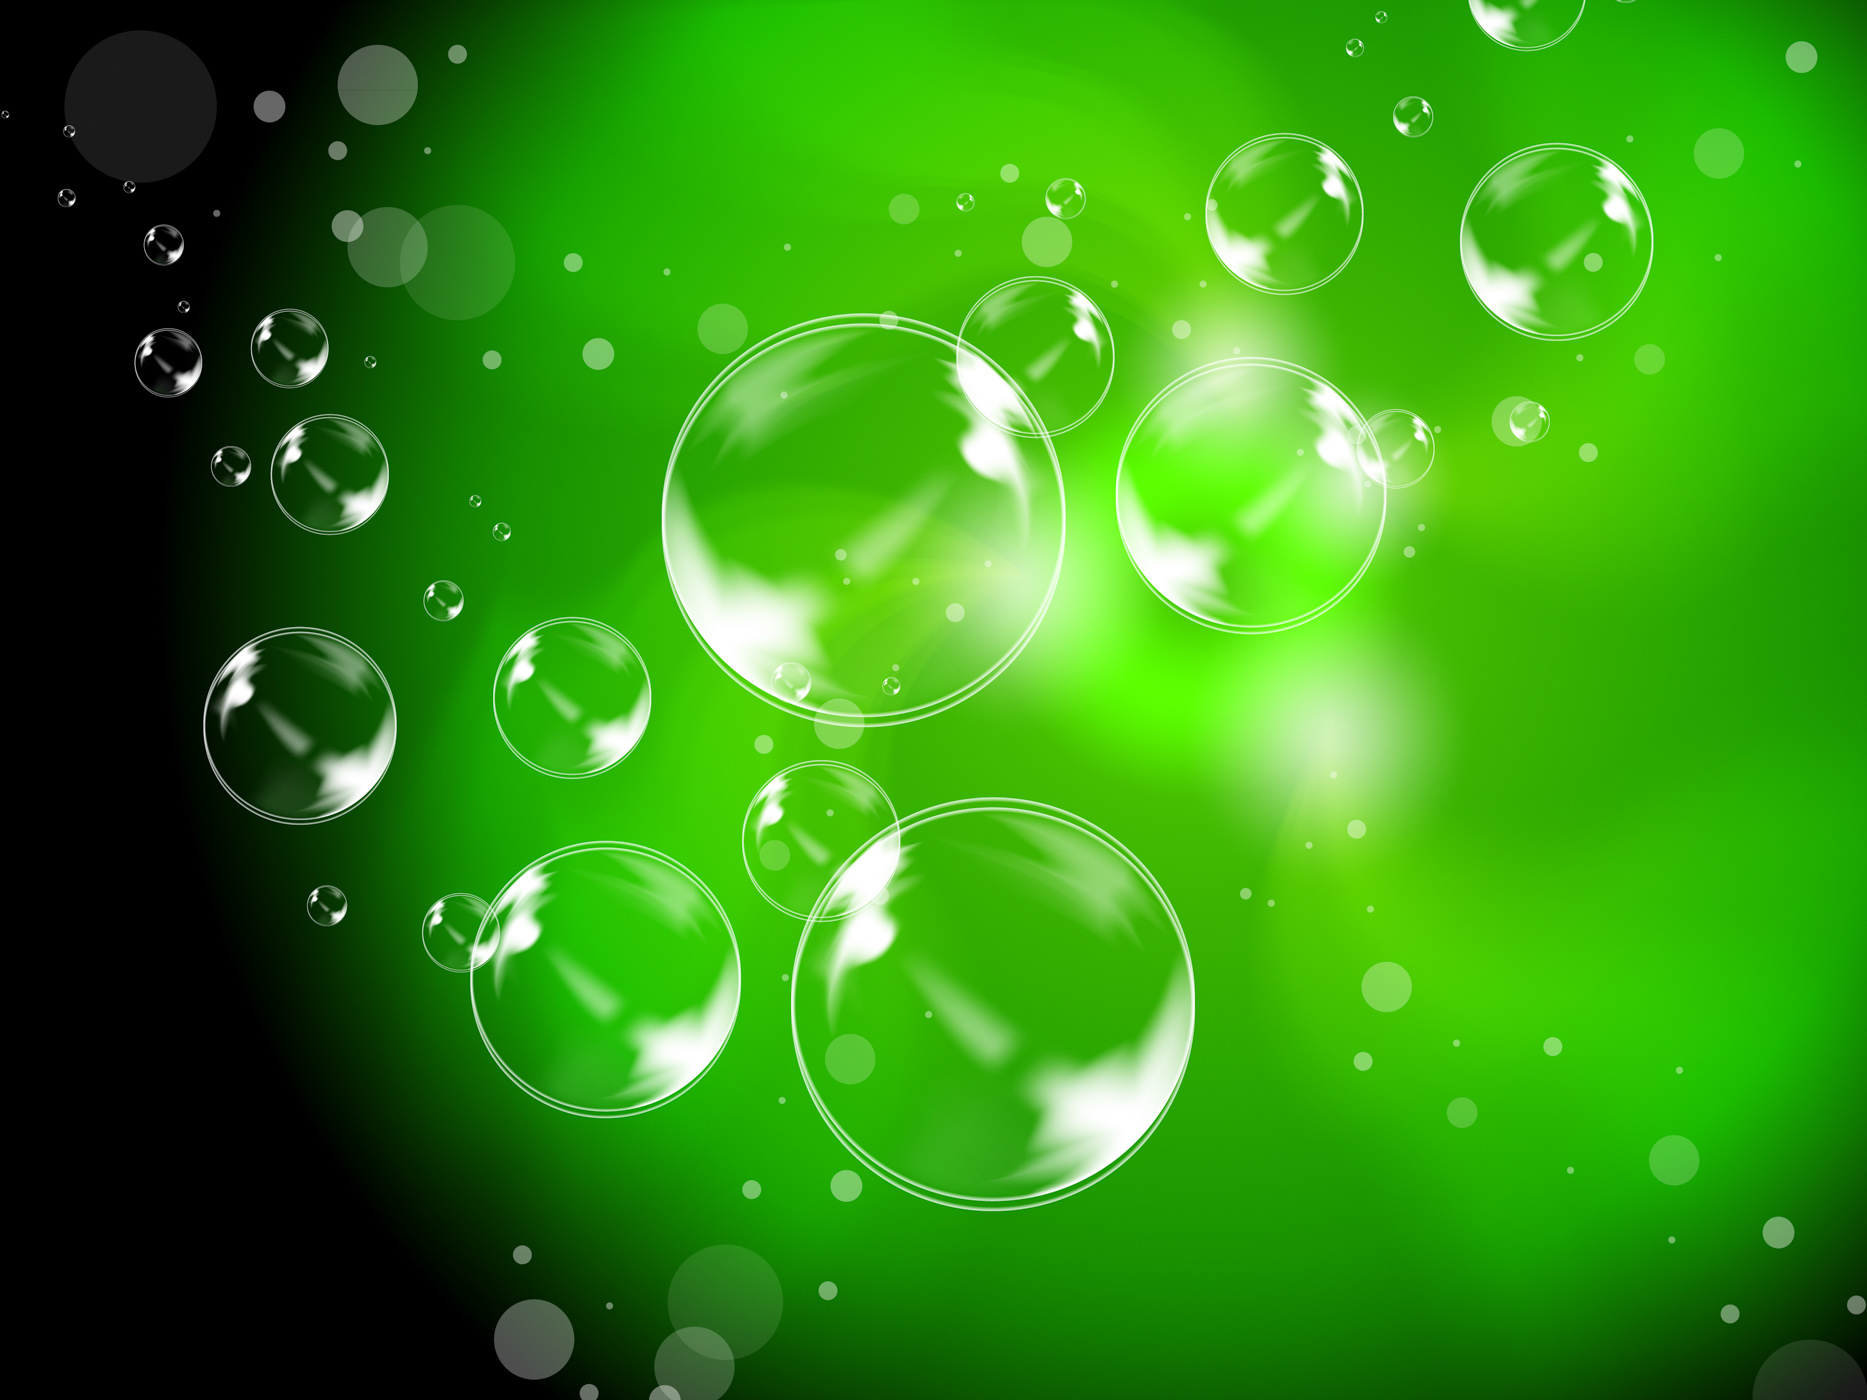 Abstract bubbles background shows beautiful creative spheres photo